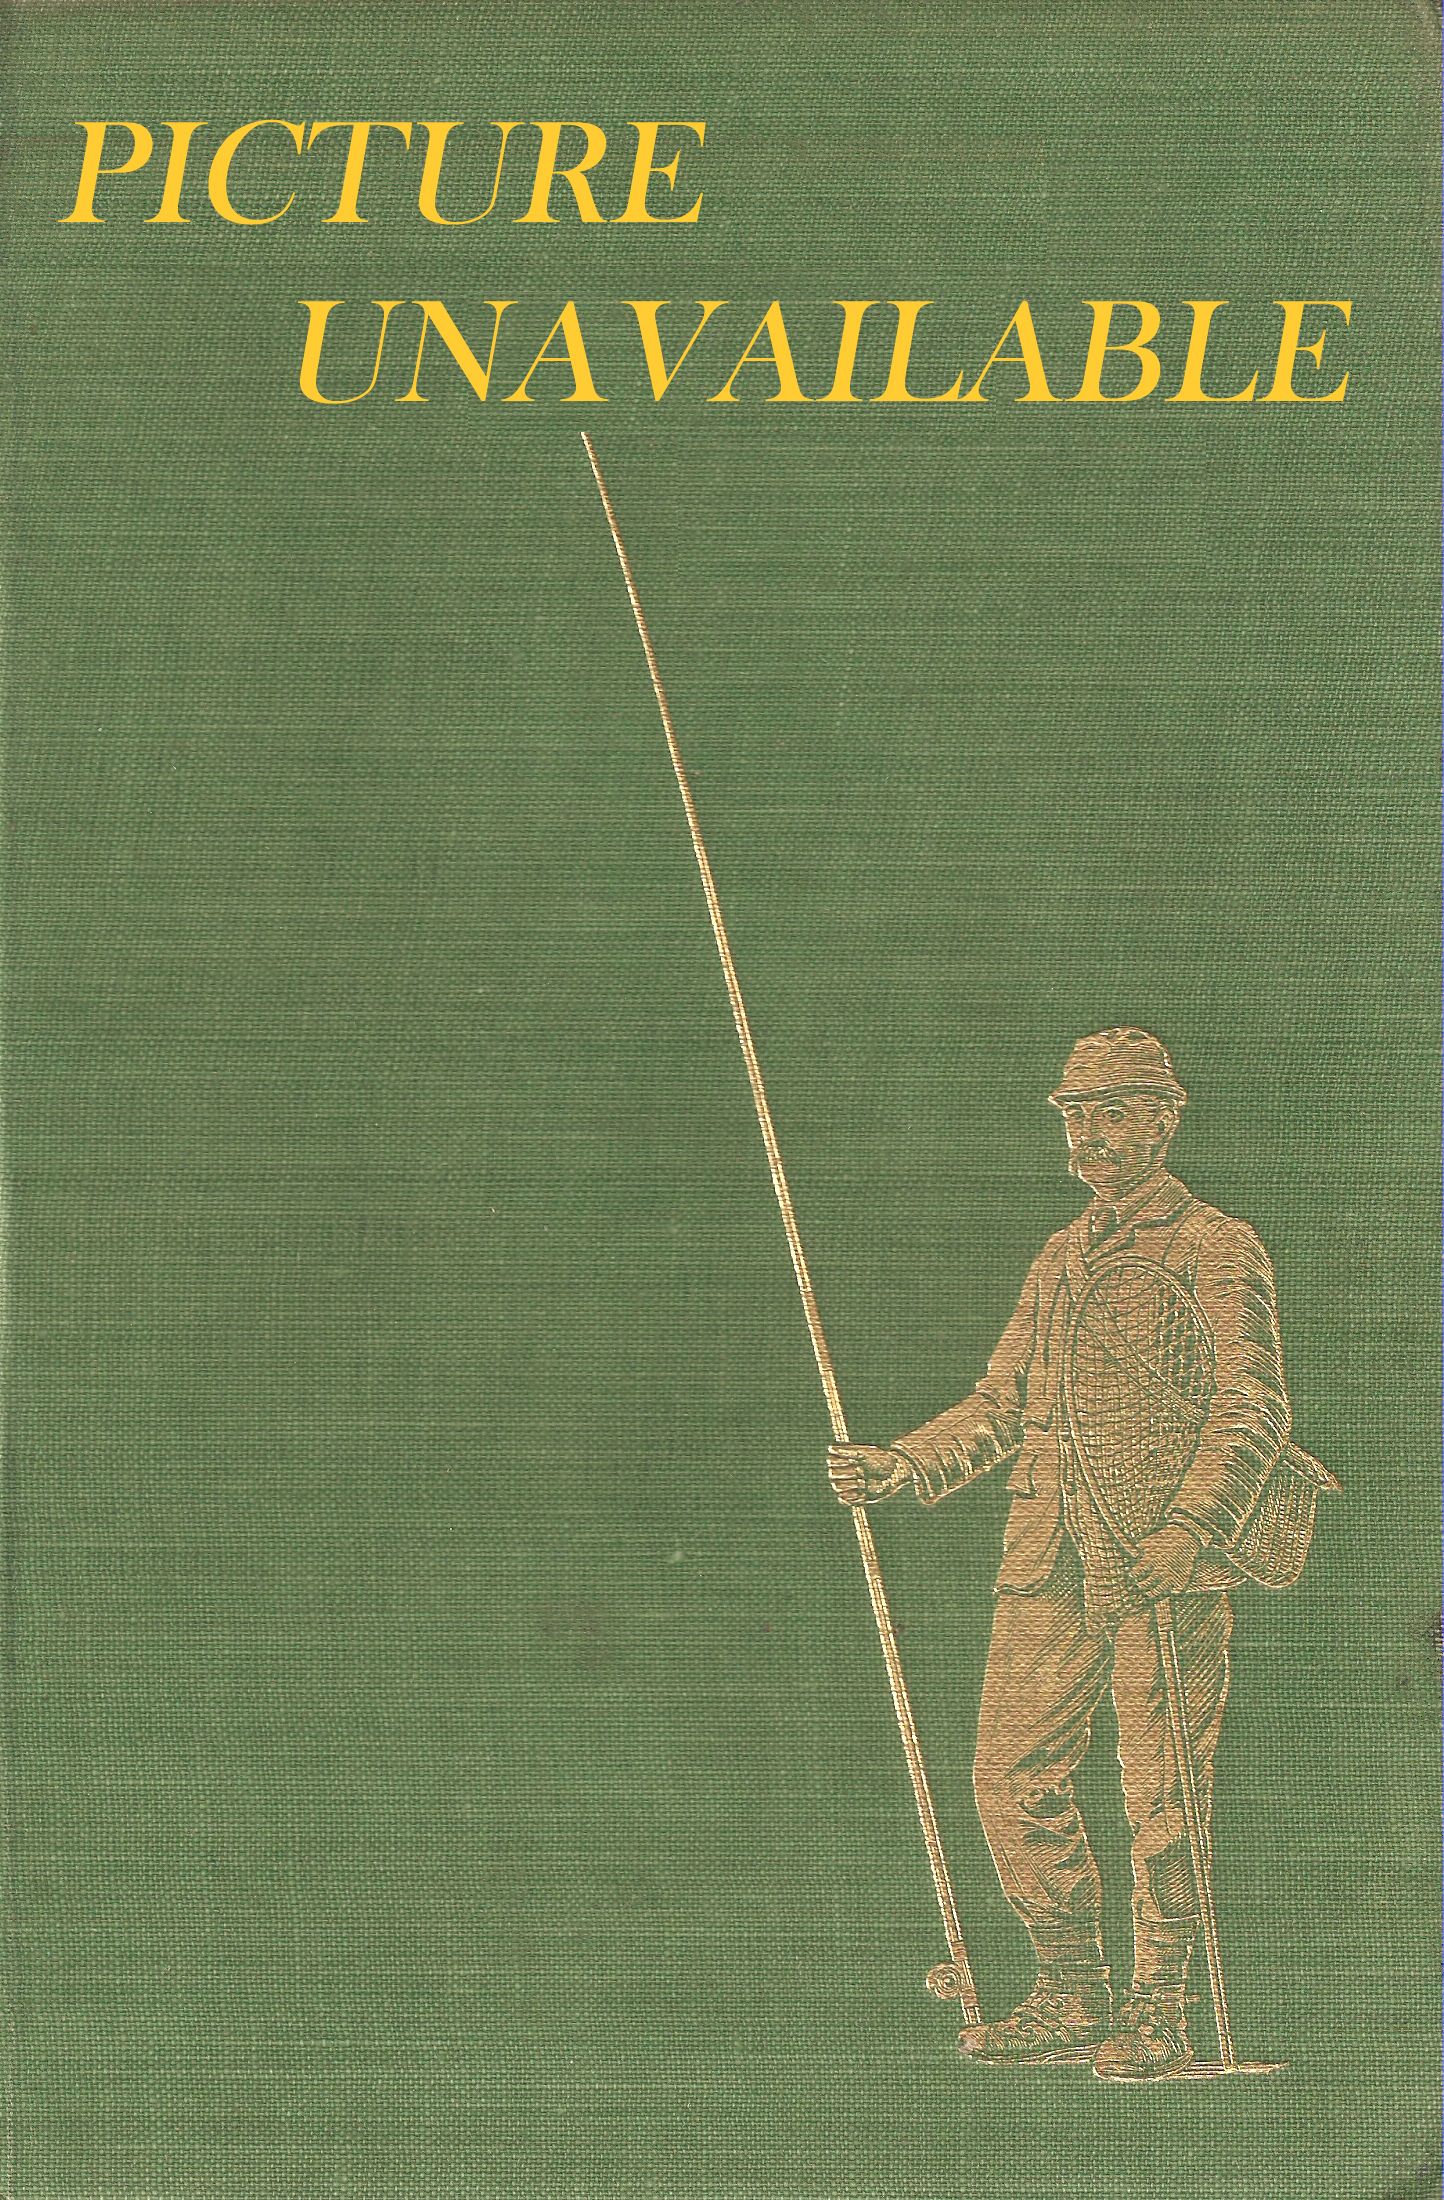 THE FOURTH ANGLING TIMES BOOK. Edited by Peter Tombleson and Jack  Thorndike. Illustrated by Ernest Petts.